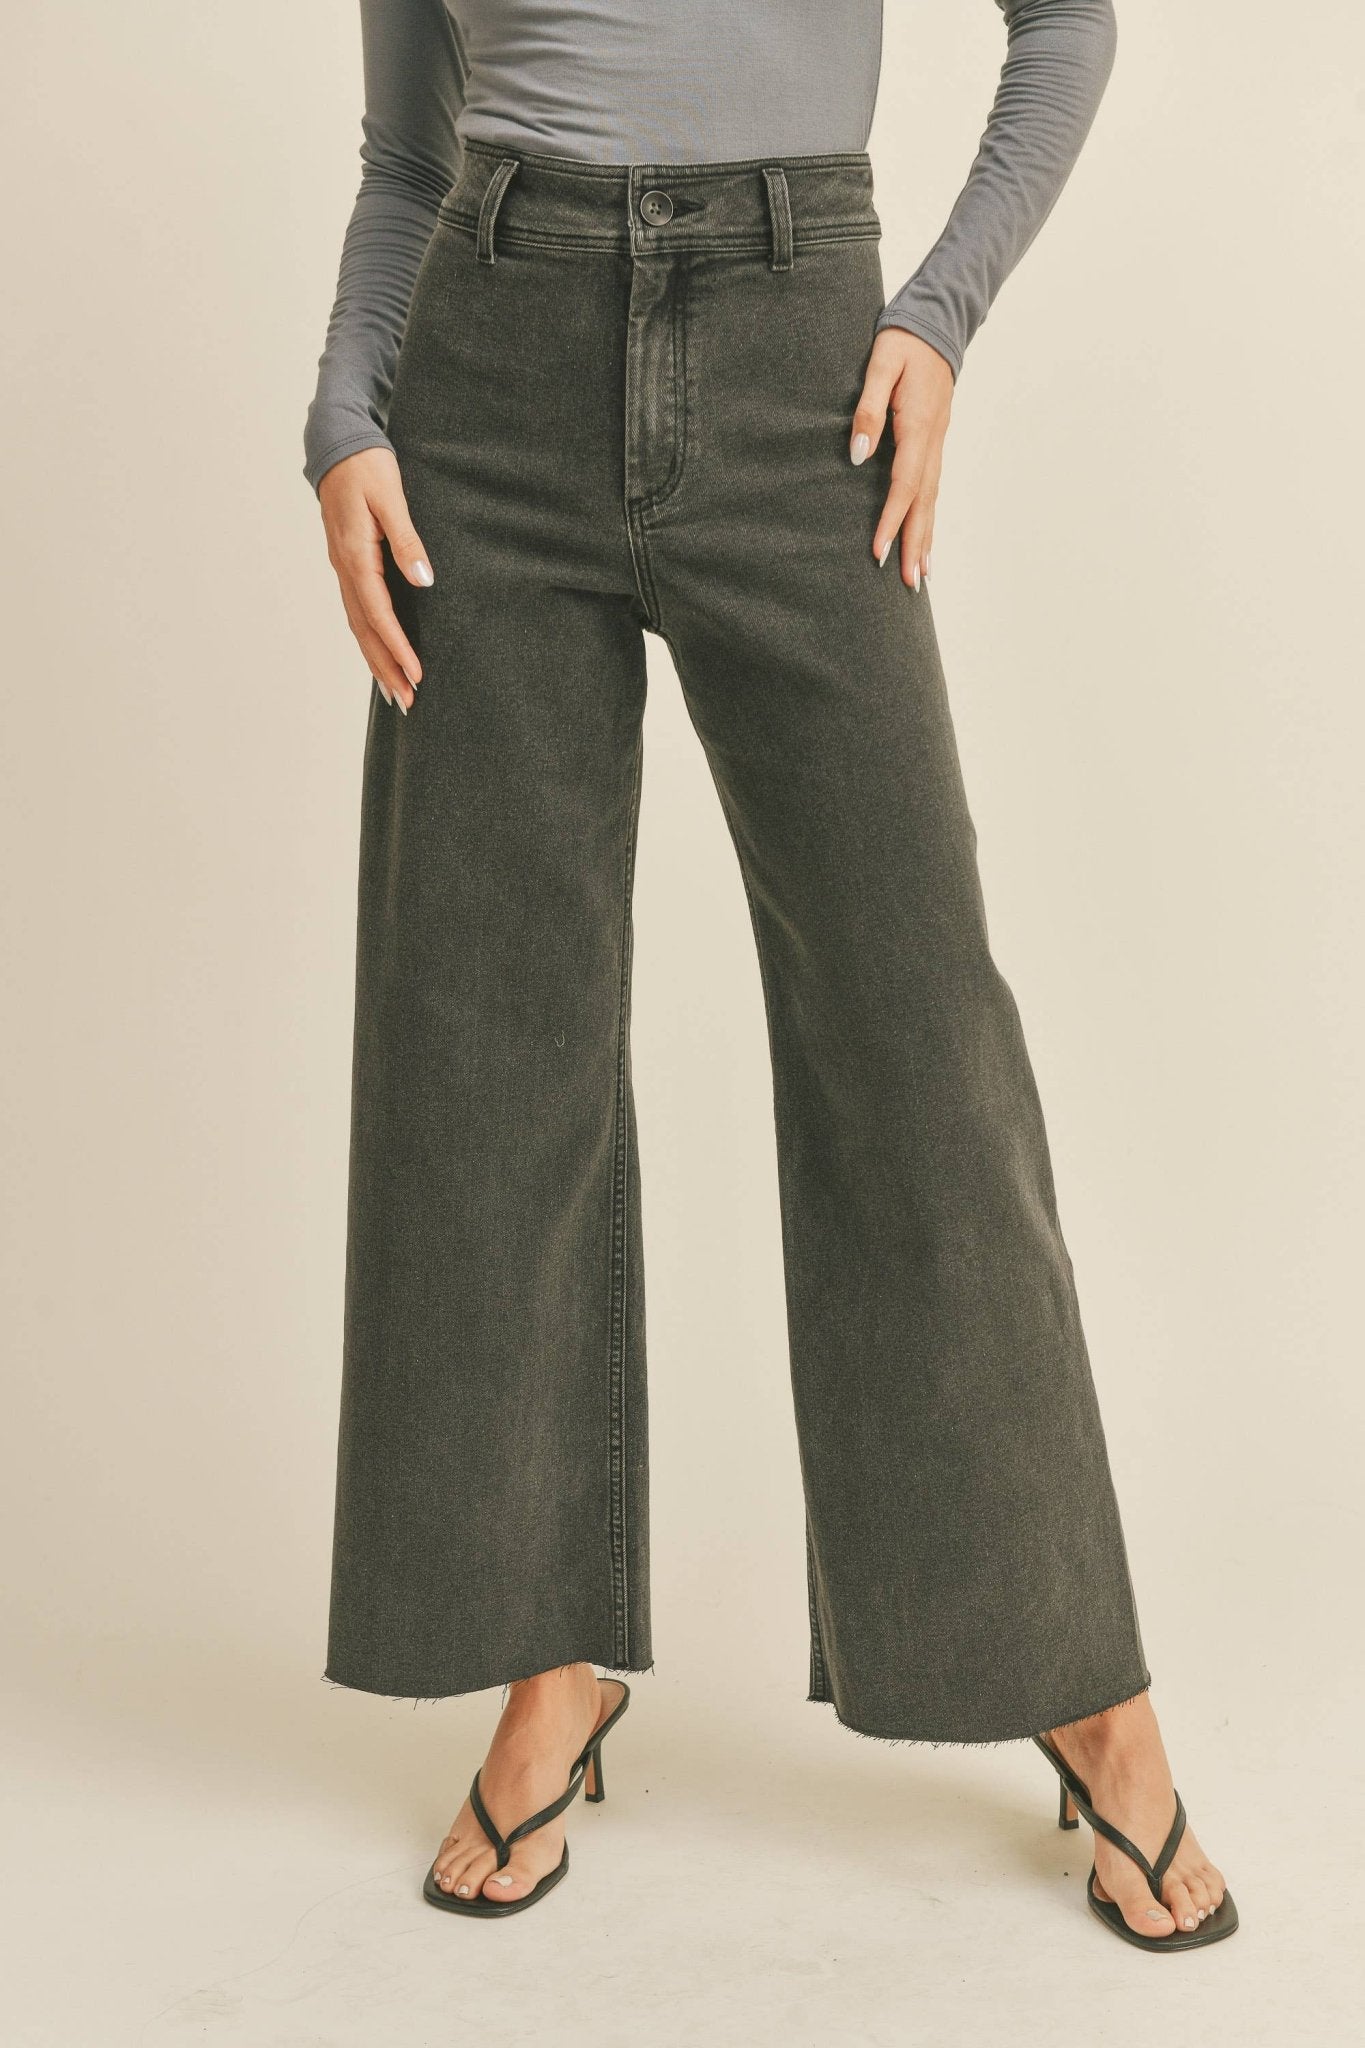 MMP623 STRAIGHT WIDE LEG DENIM PANTS - The Dragonfly Boutique